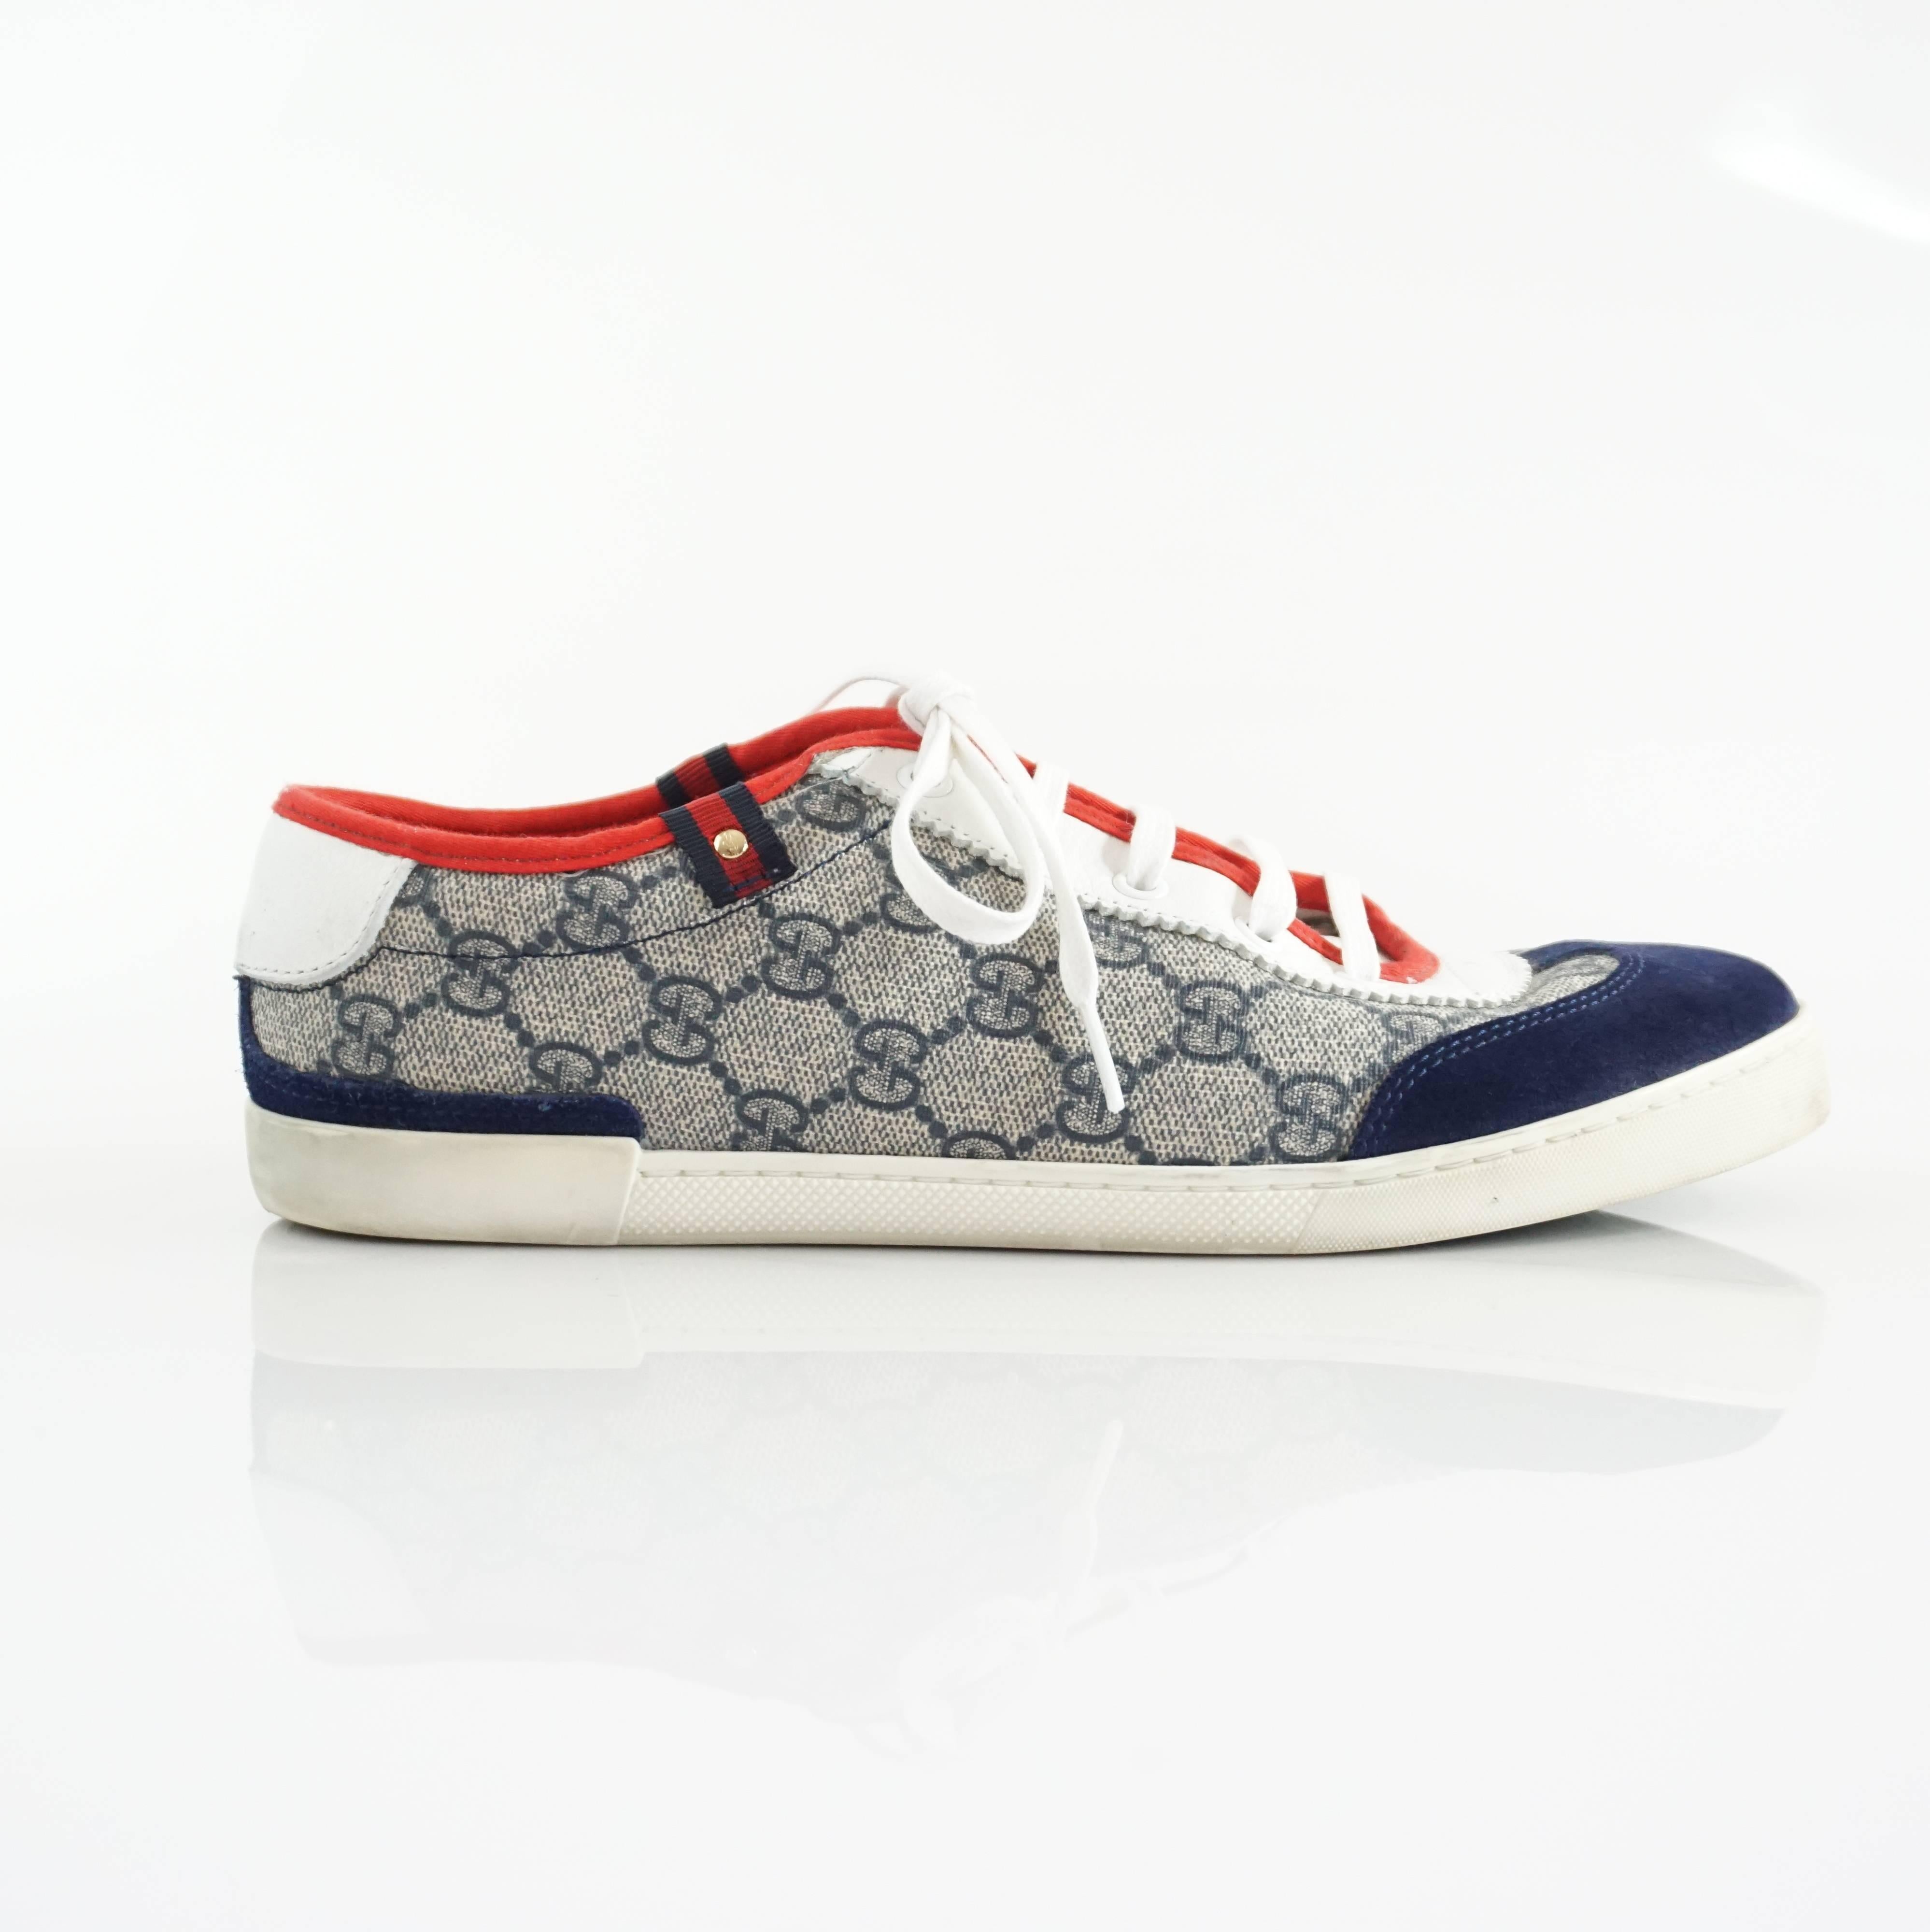 These Gucci sneakers are fabric with the Gucci monogram print in blue. There is blue suede-like detailing and a red trim. These sneakers are in good condition with overall staining and markings. Size 39.